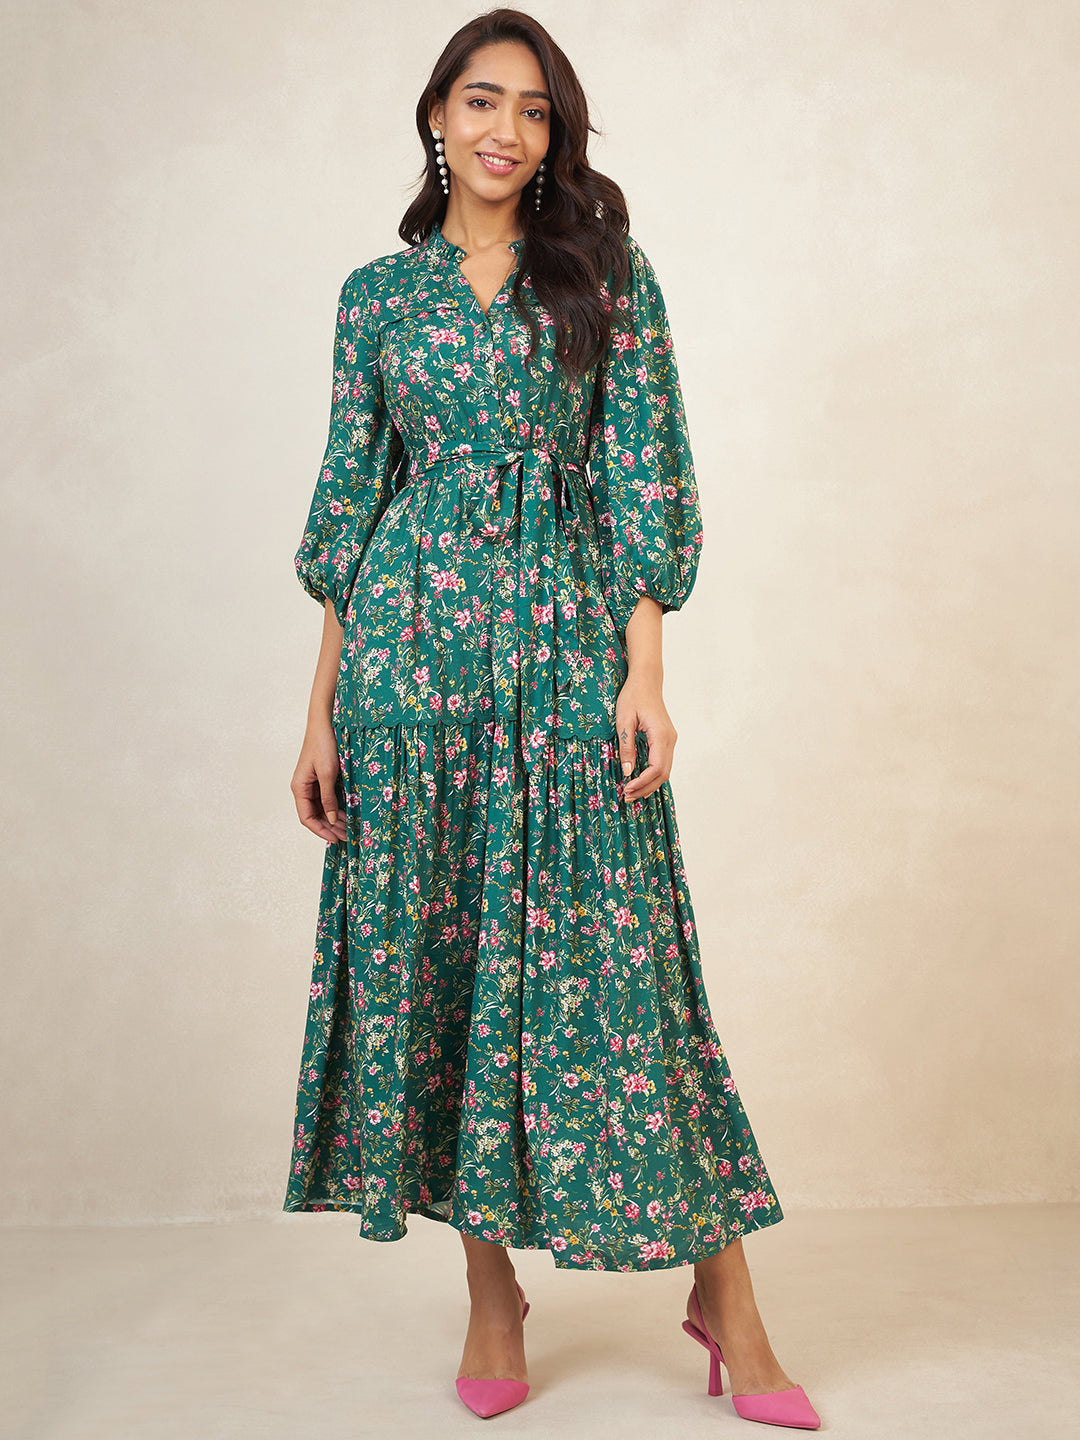 Green Floral Print With Scallop Trim Maxi Dress